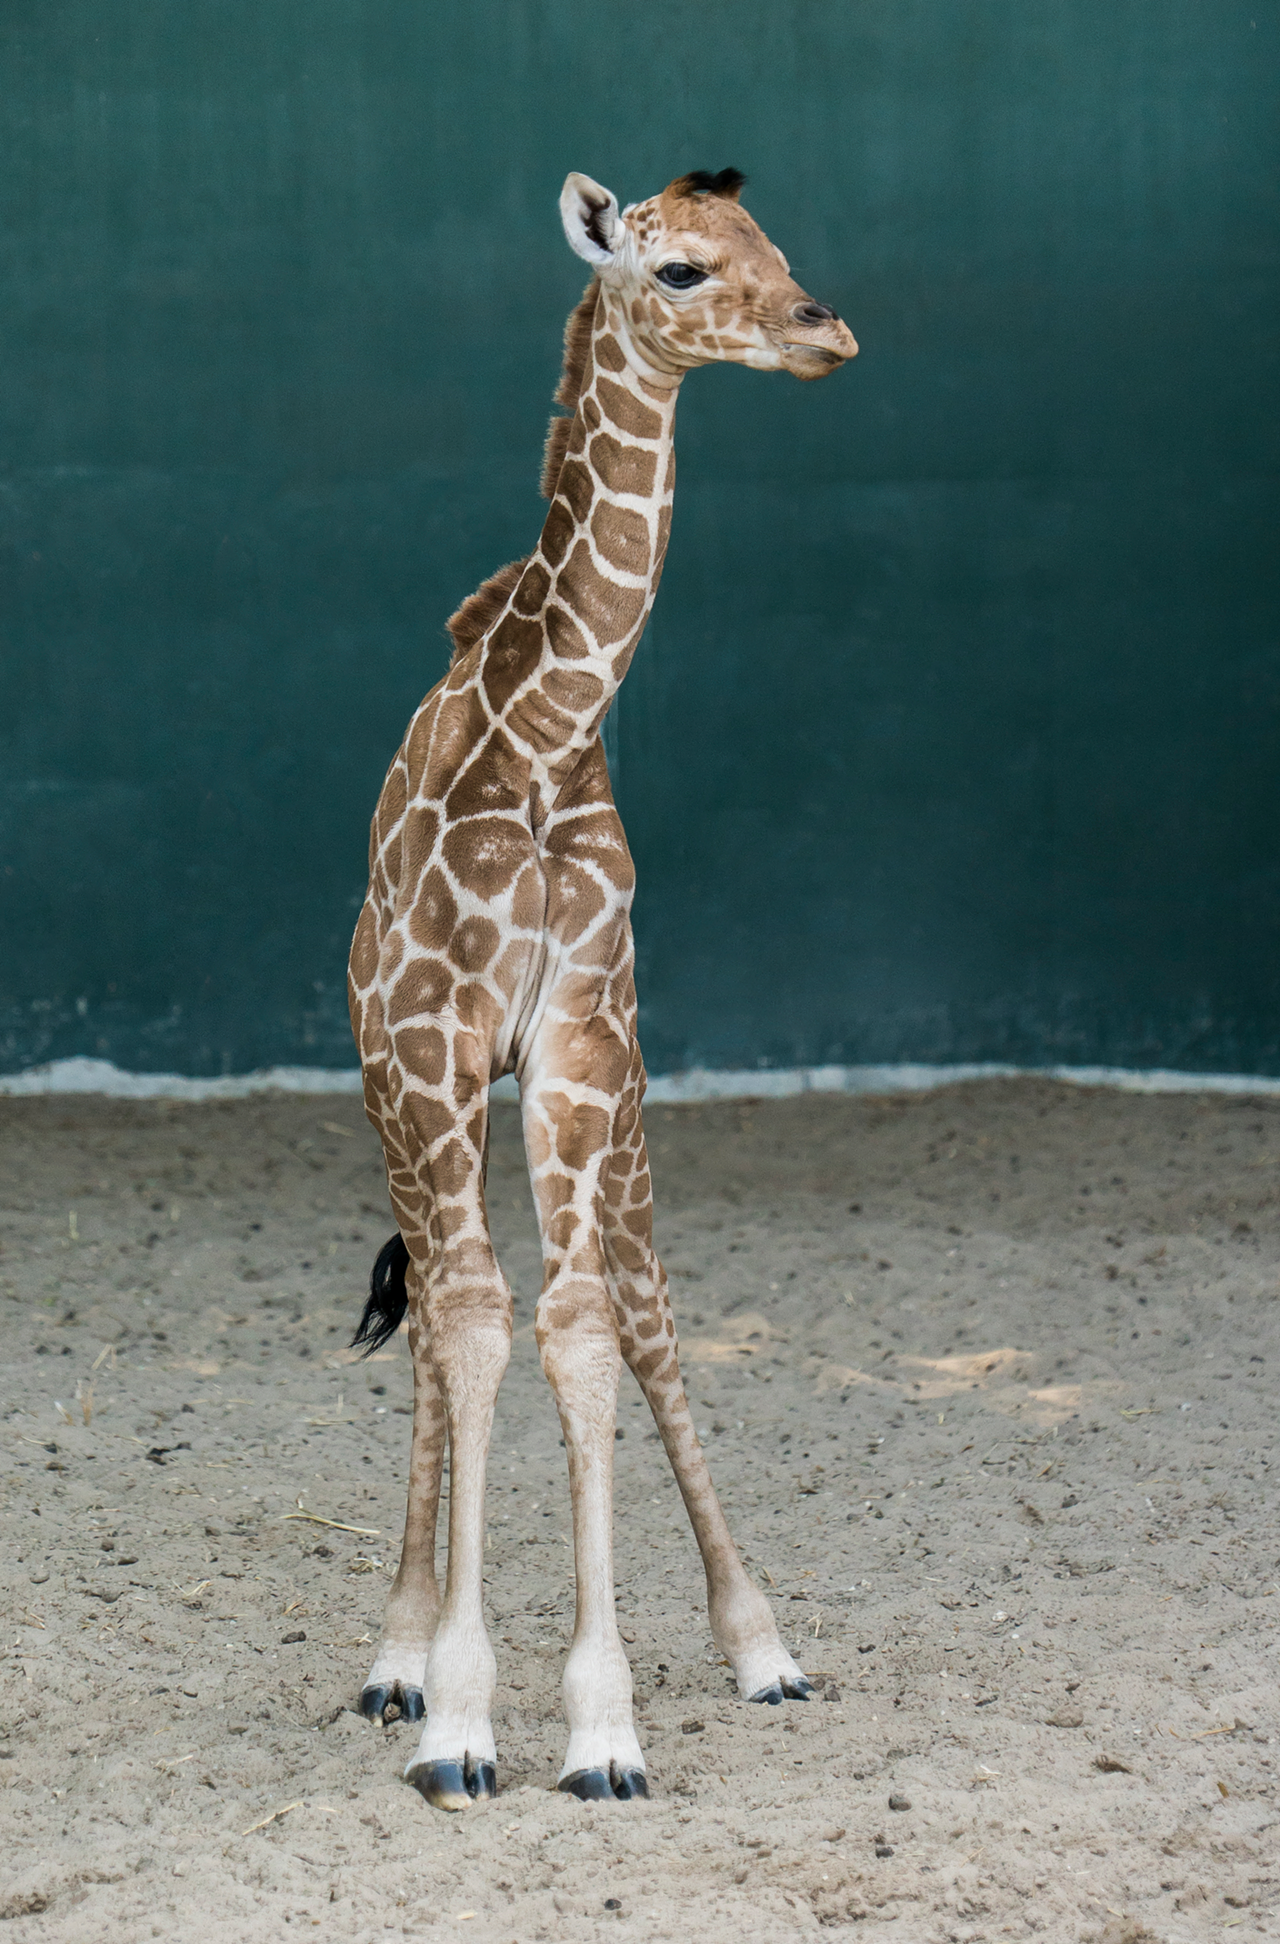 At only a few days old, this giraffe is already taller than about half the editorial staff at CL.